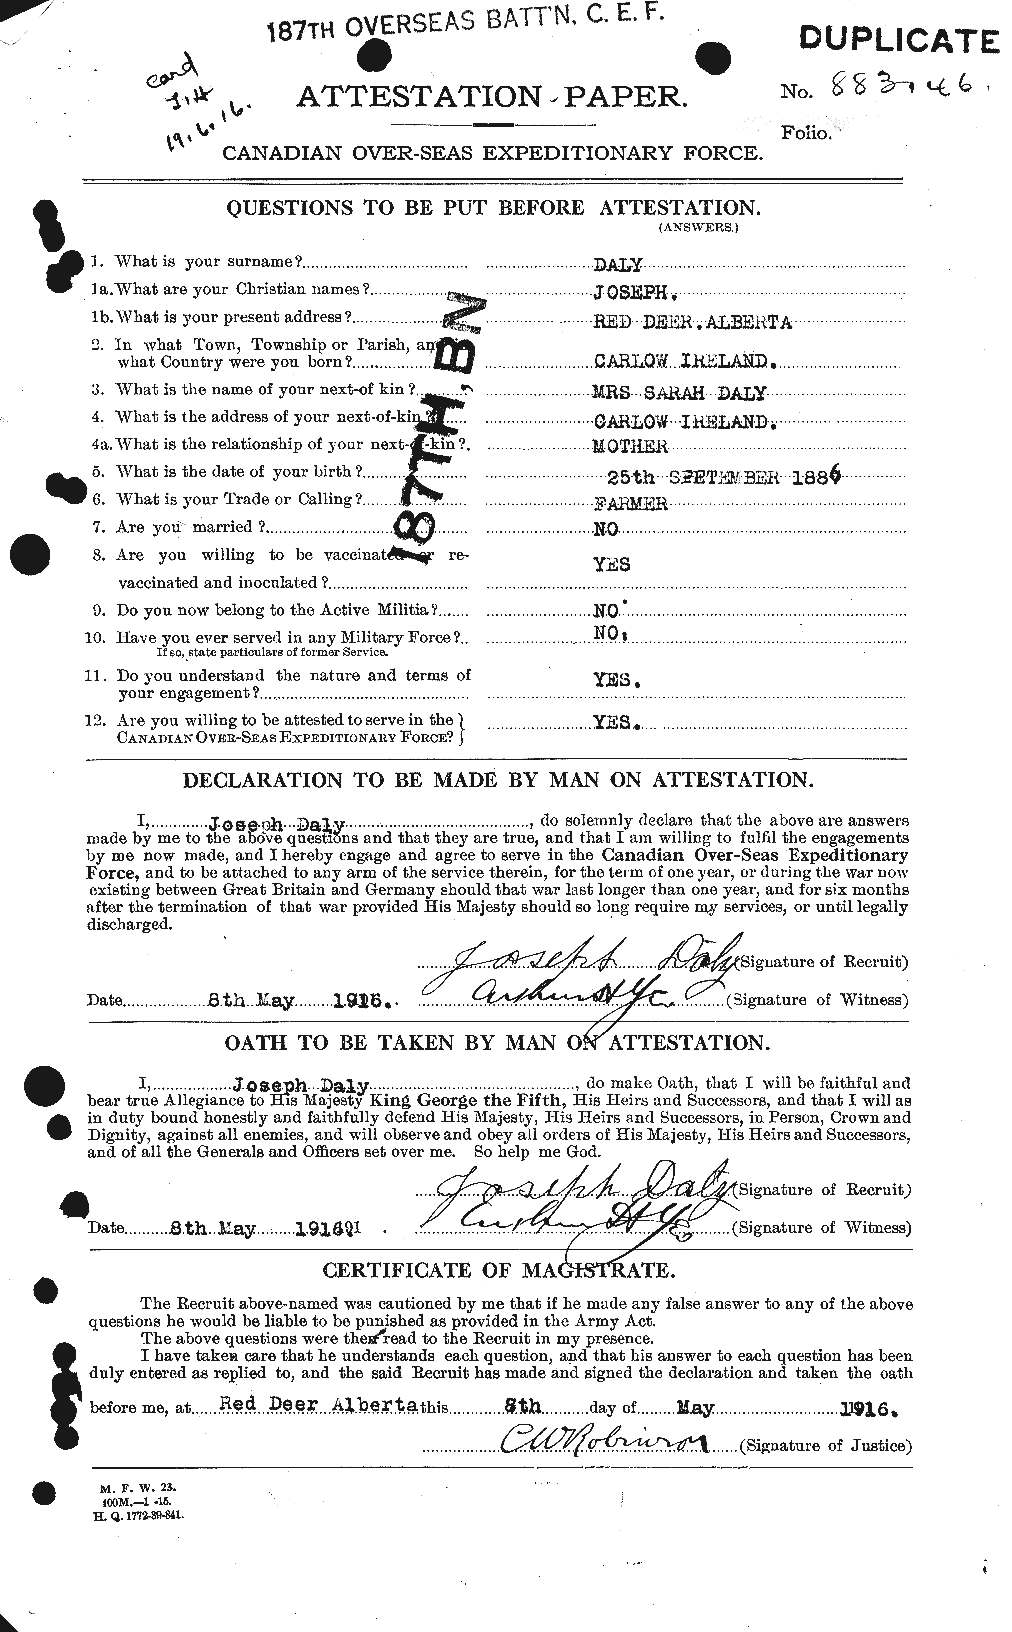 Personnel Records of the First World War - CEF 276369a